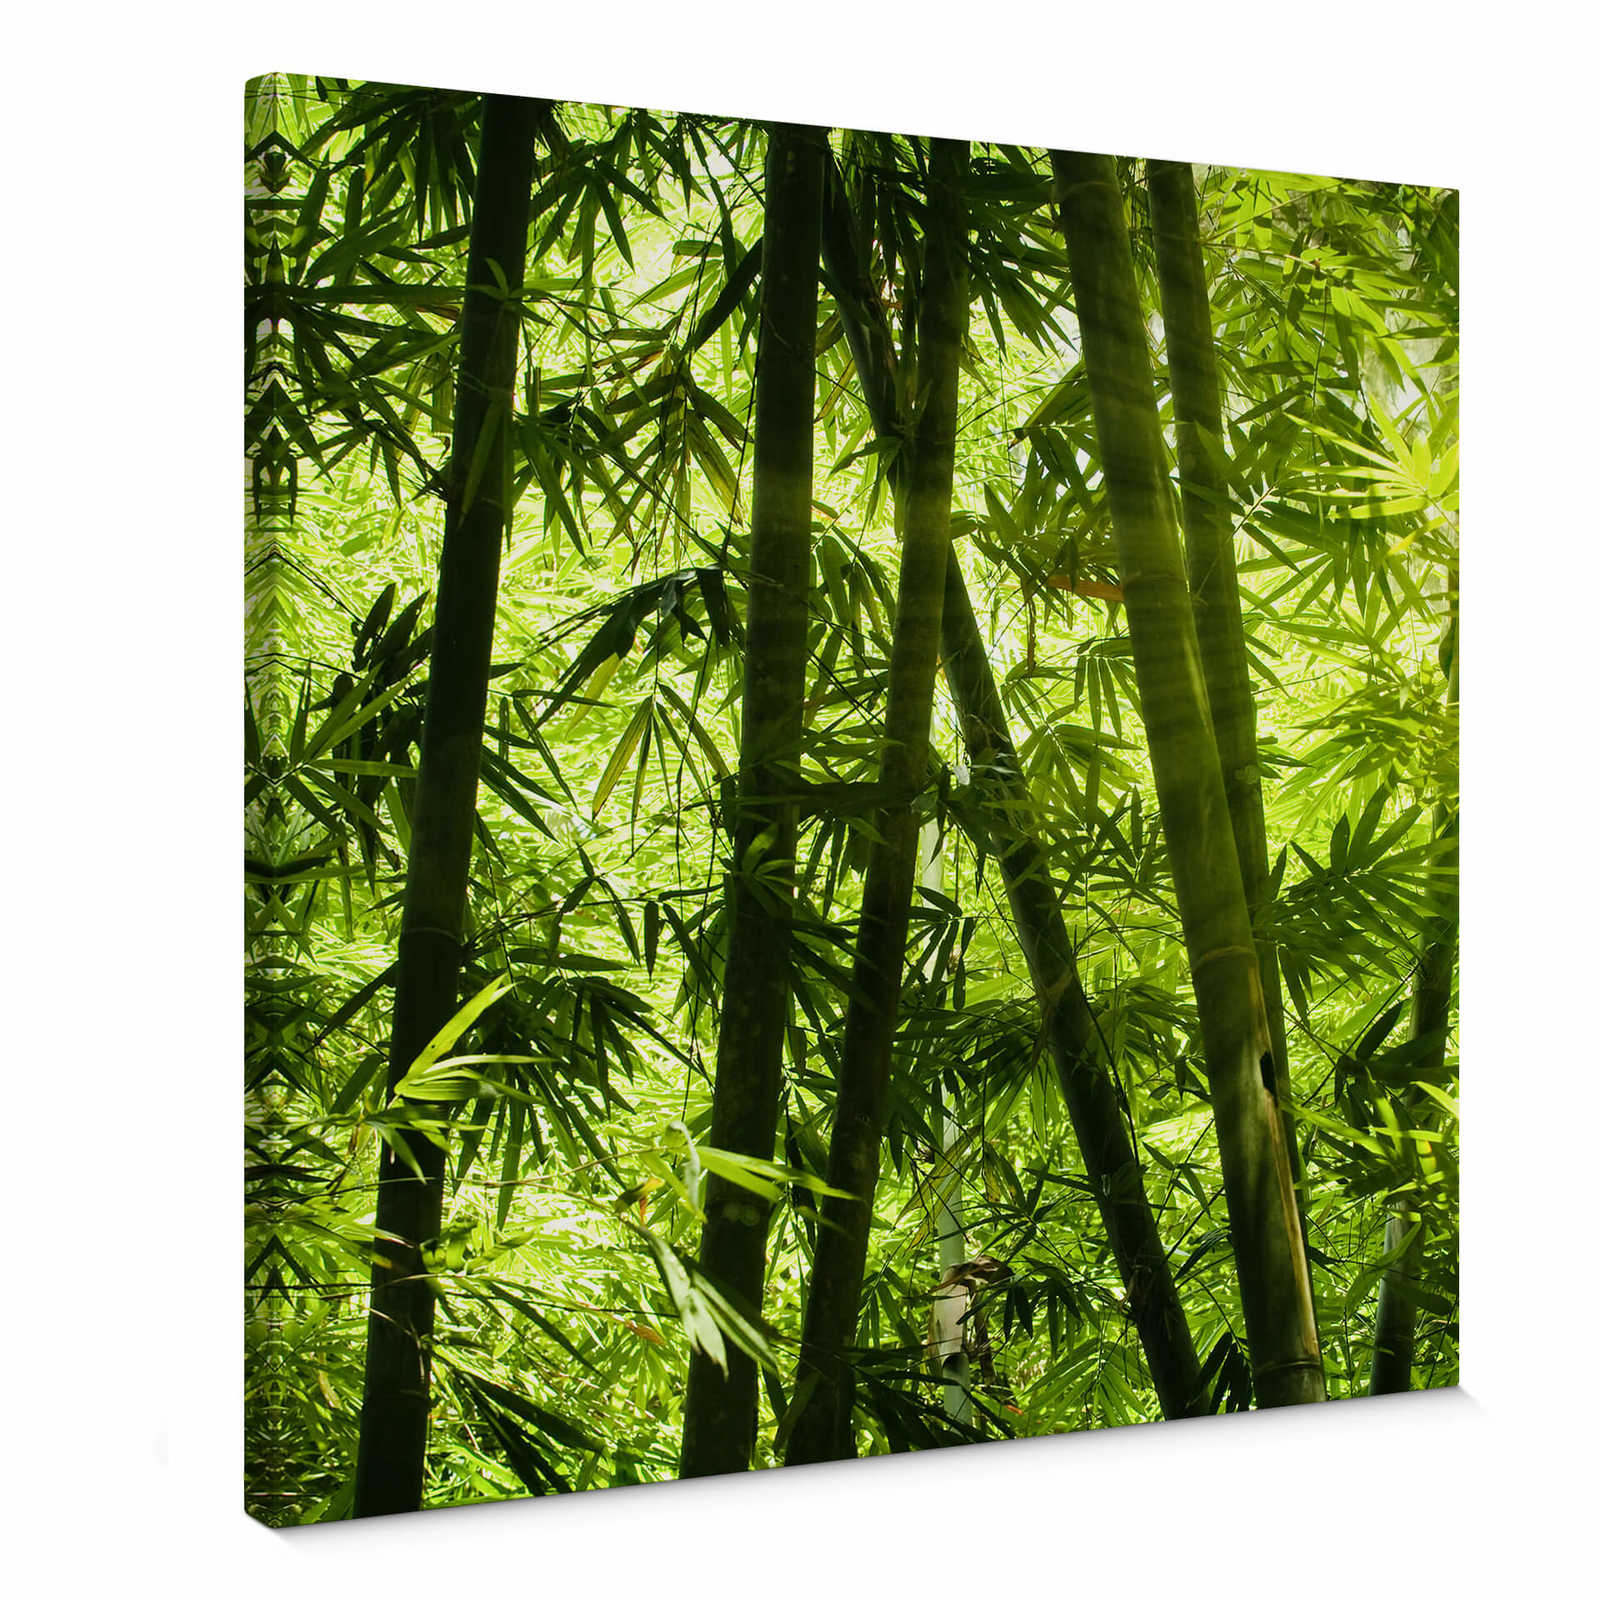         Square canvas print bamboo forest and sunshine
    